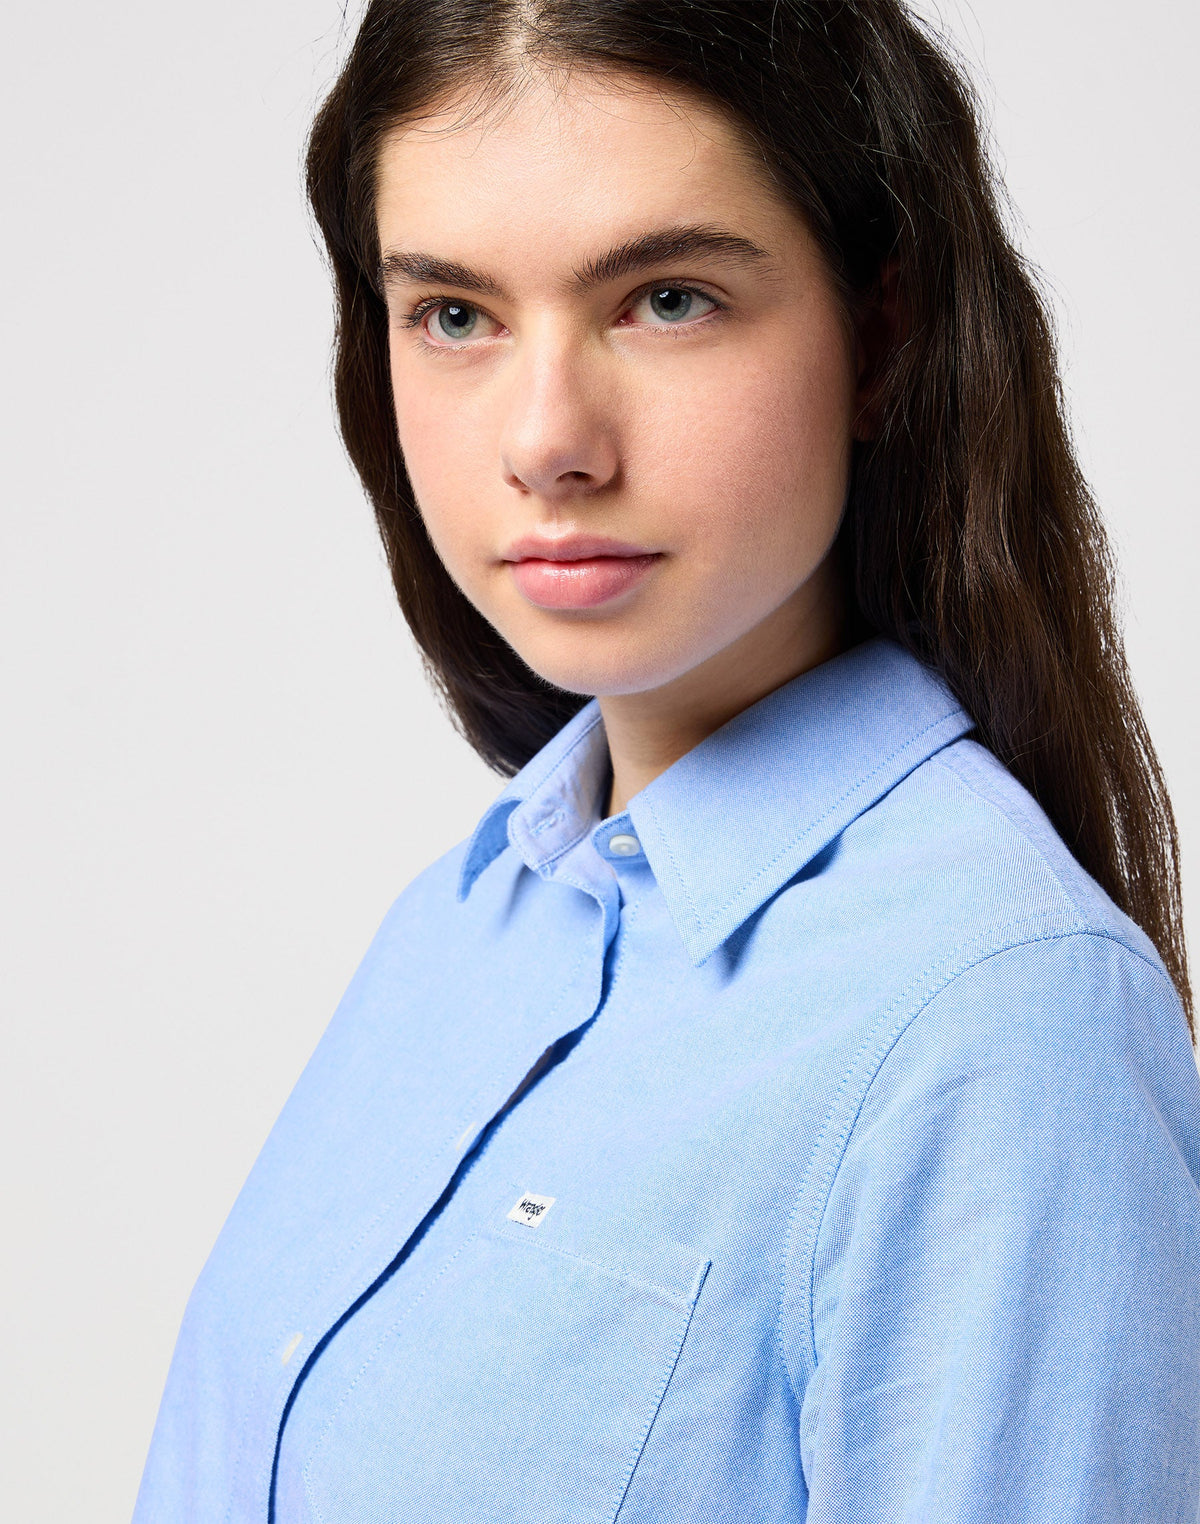 One Pocket Shirt in Bright Blue